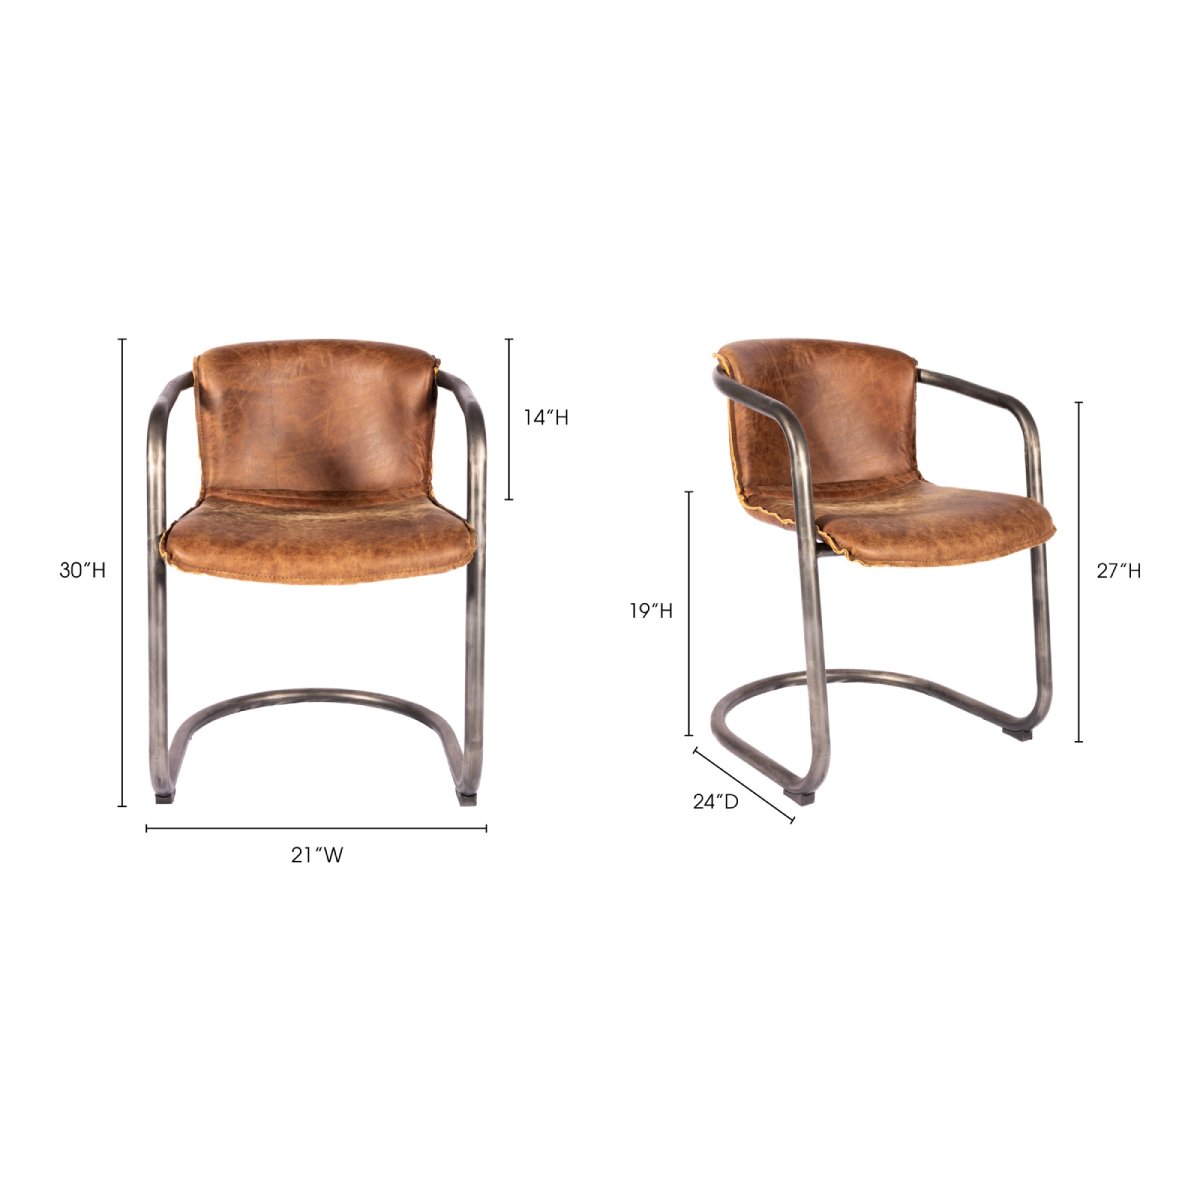 Benedict Dining Chair Light Brown-M2 Dining Chairs Moe's     Four Hands, Burke Decor, Mid Century Modern Furniture, Old Bones Furniture Company, Old Bones Co, Modern Mid Century, Designer Furniture, https://www.oldbonesco.com/